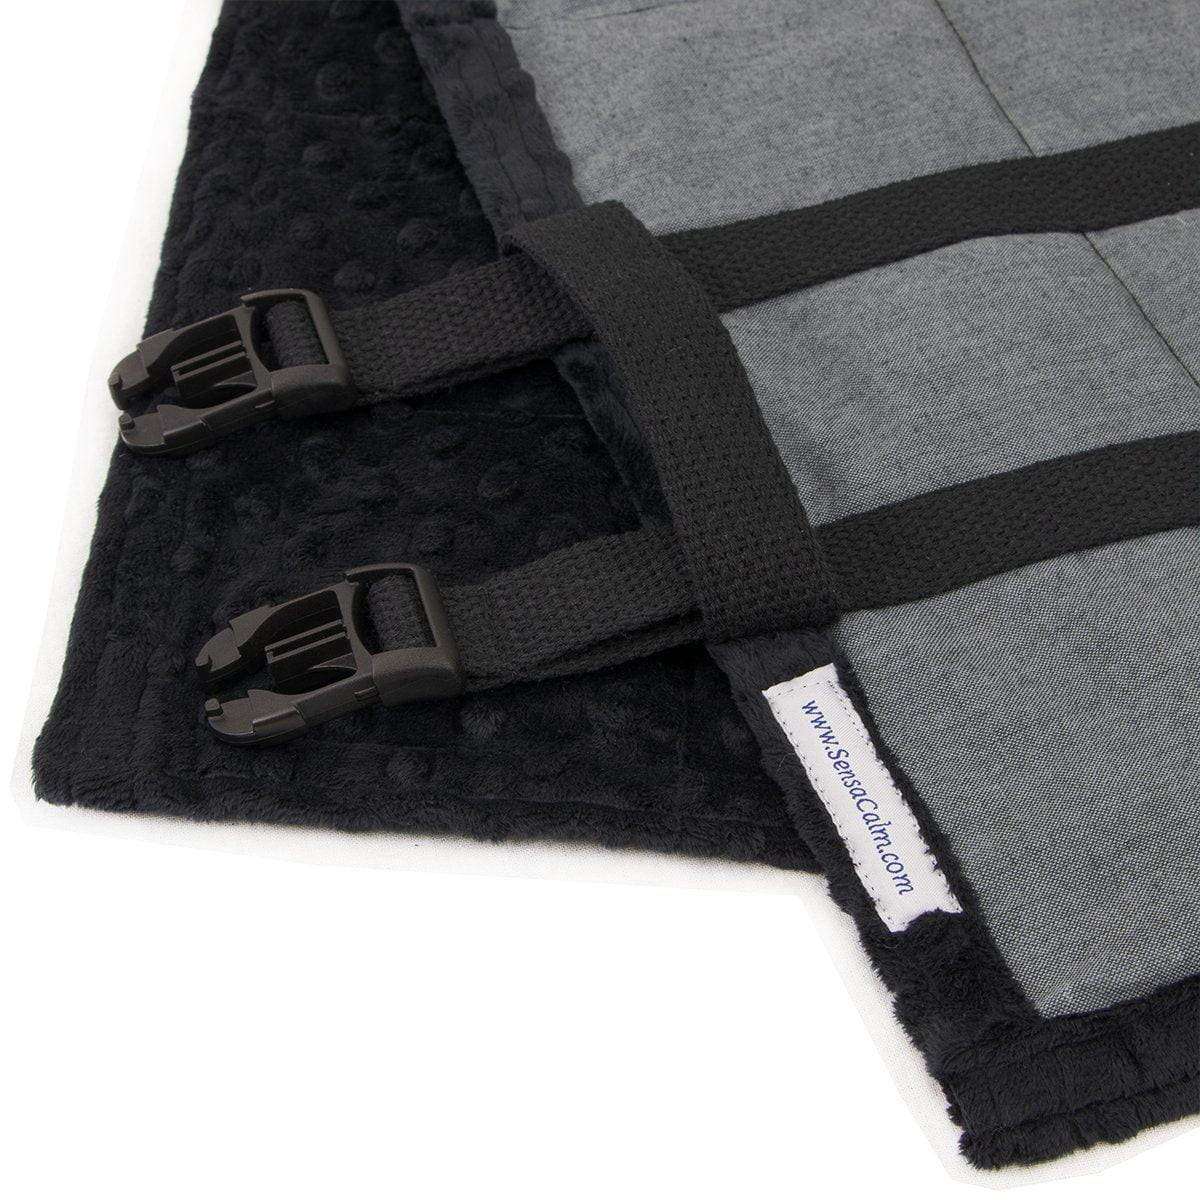 Weighted Travel Blanket "Calm-To-Go" by SensaCalm